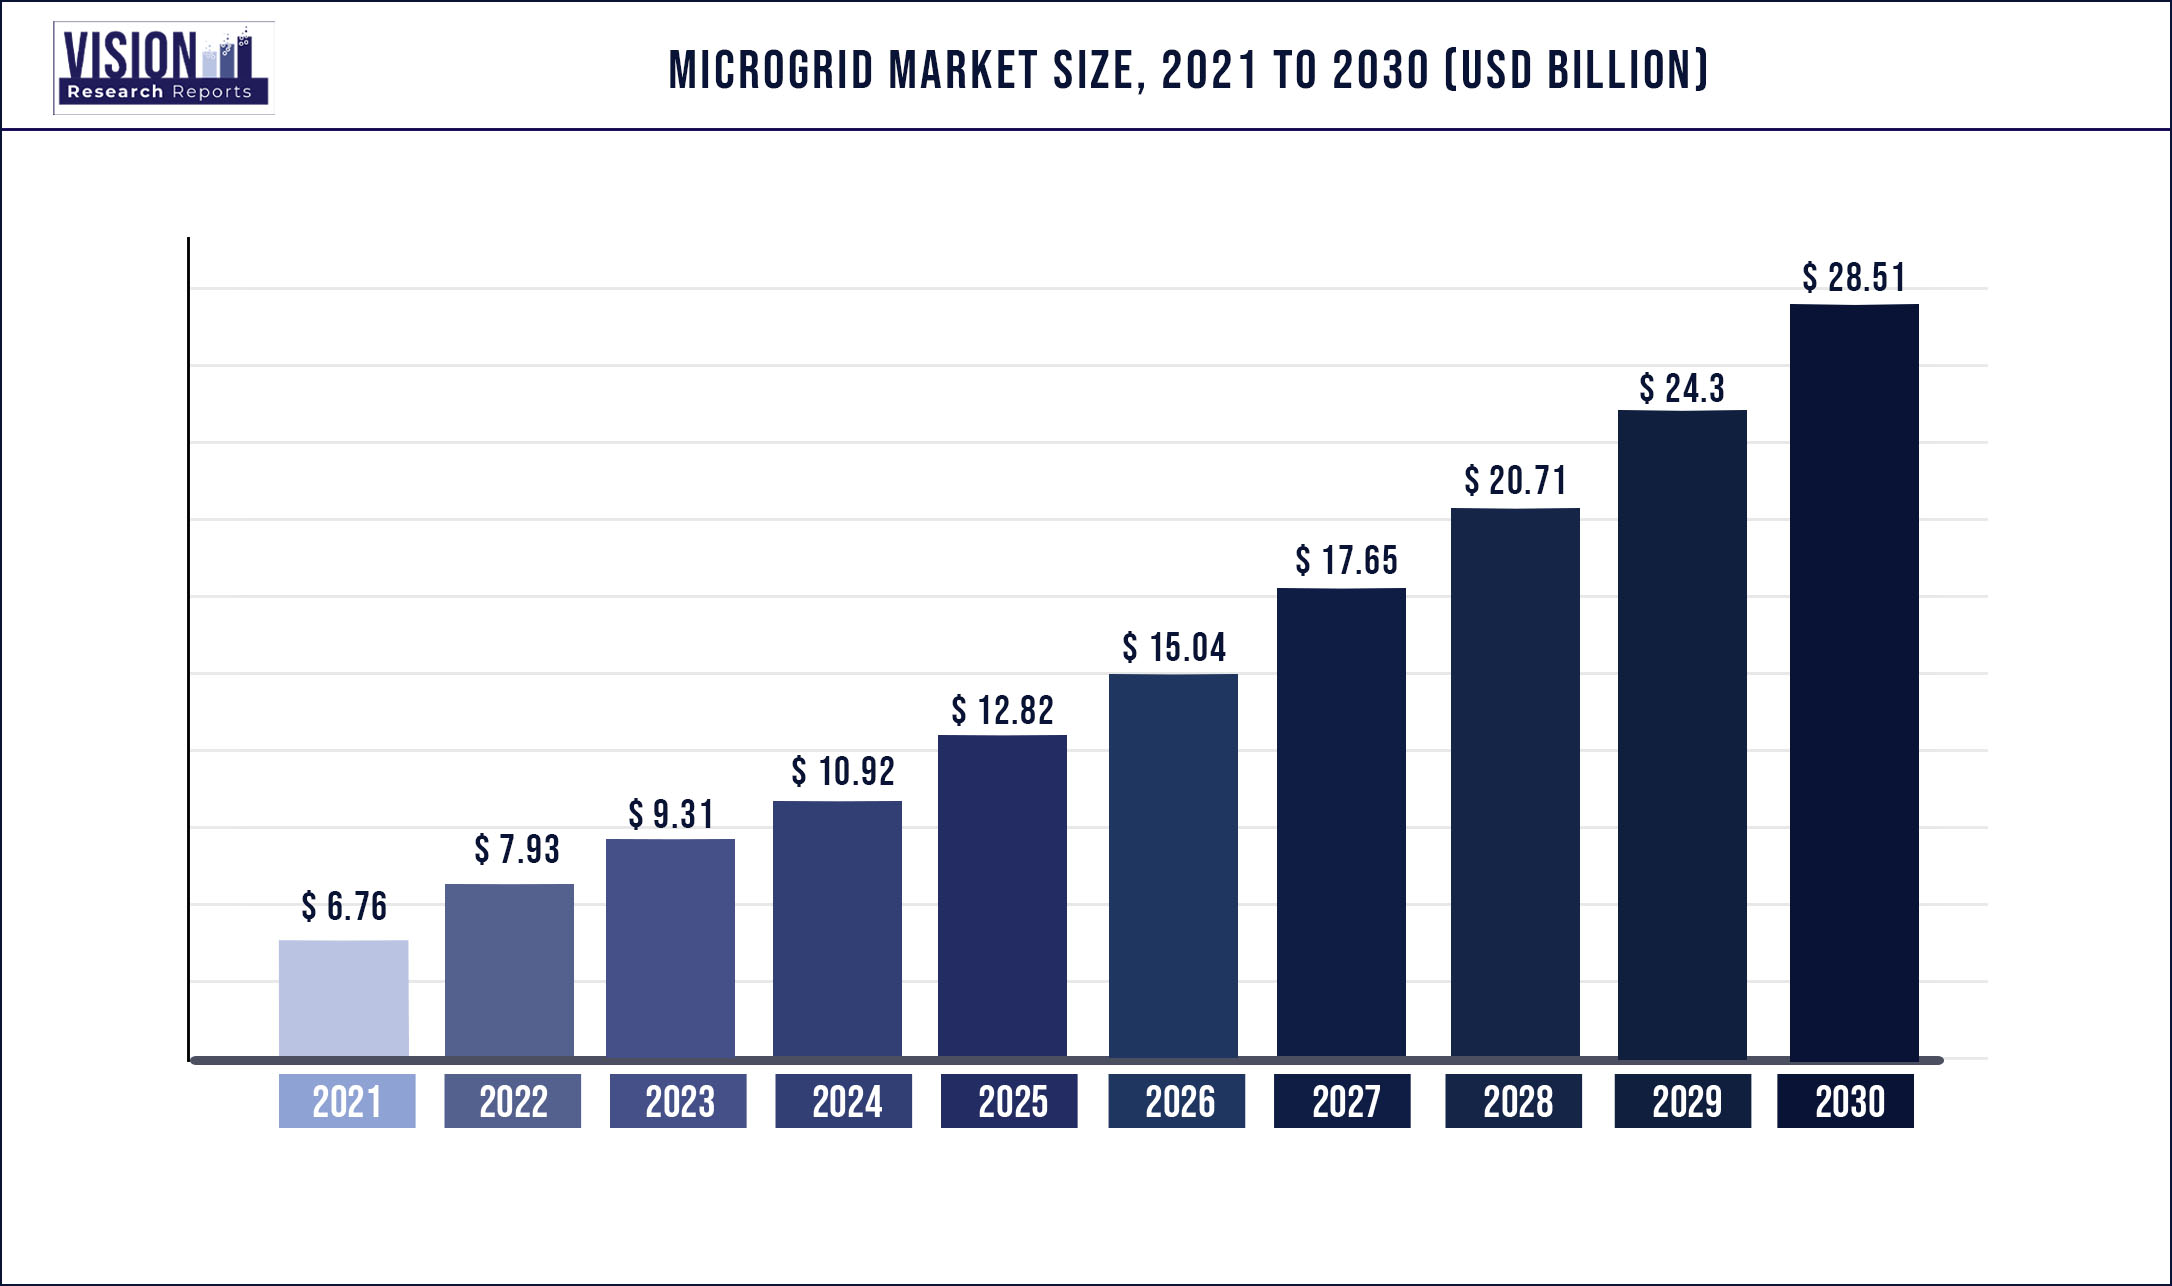 Microgrid Market Size 2021 to 2030